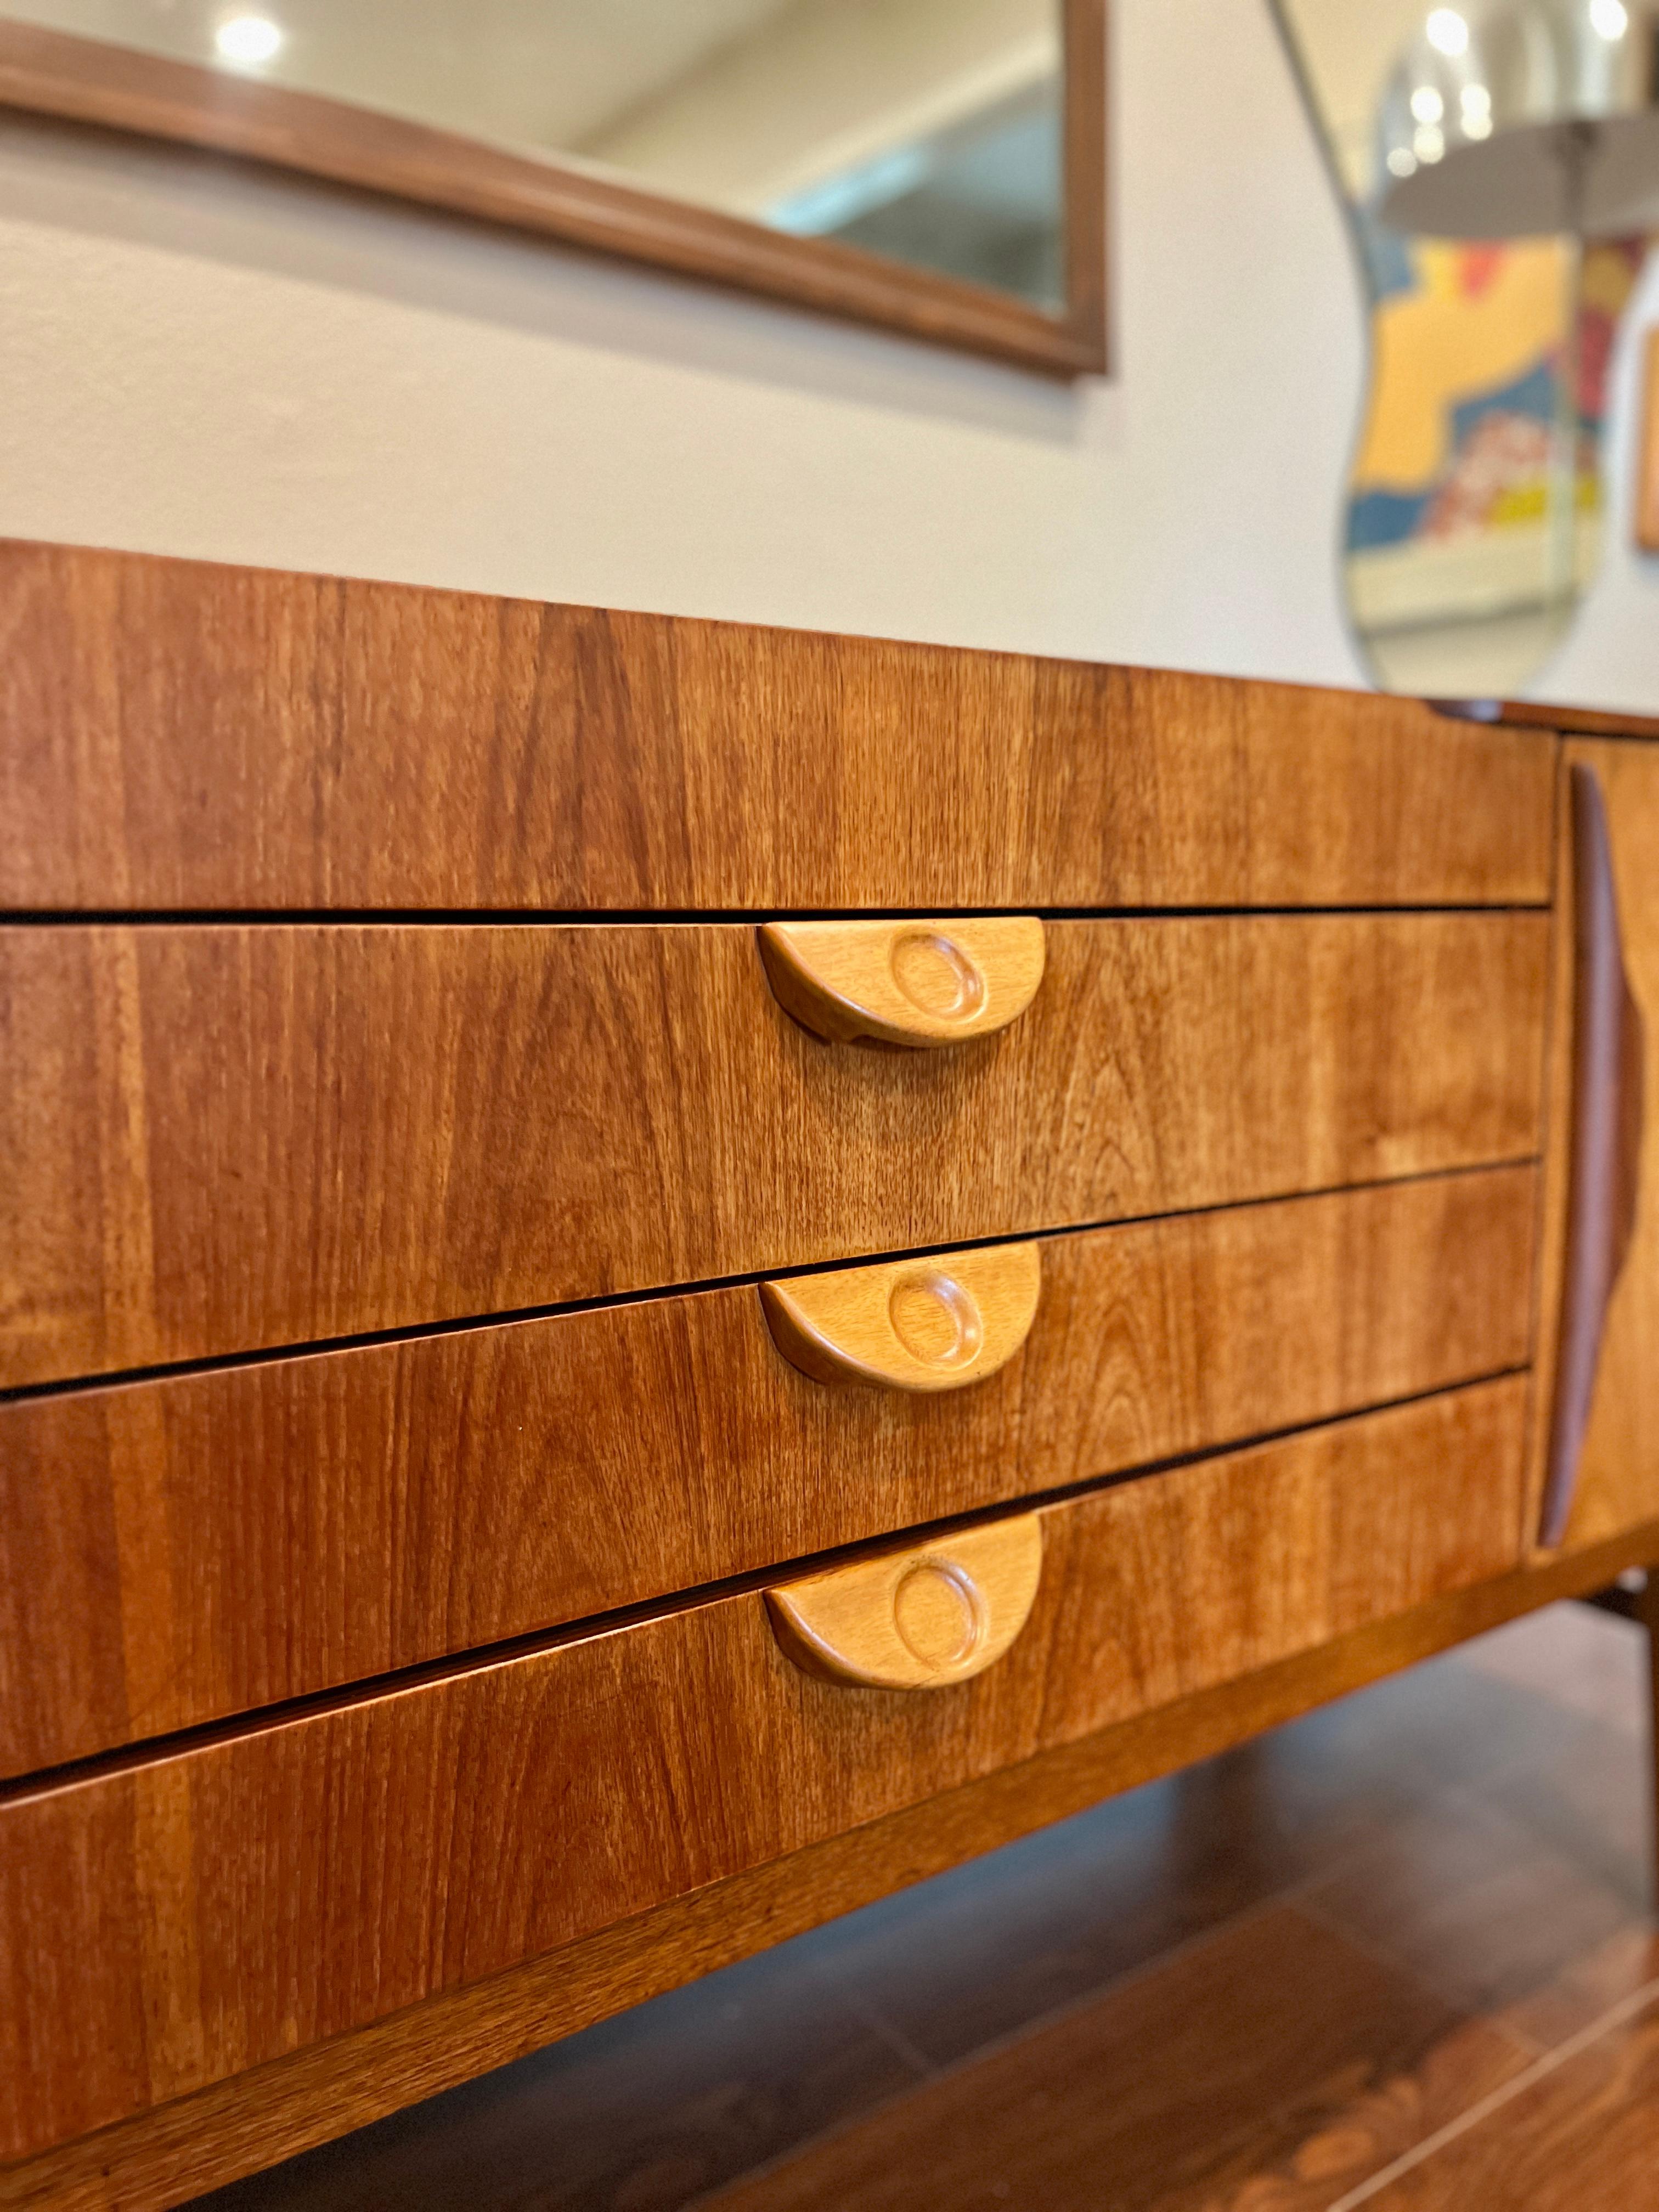 This beautiful mid century modern sideboard was designed by Beautility, circa 1960s. The sideboard features two spacious cupboards and three drawers. Beautility is renowned for its seamless and sleek design coupled with superbly high manufacturing